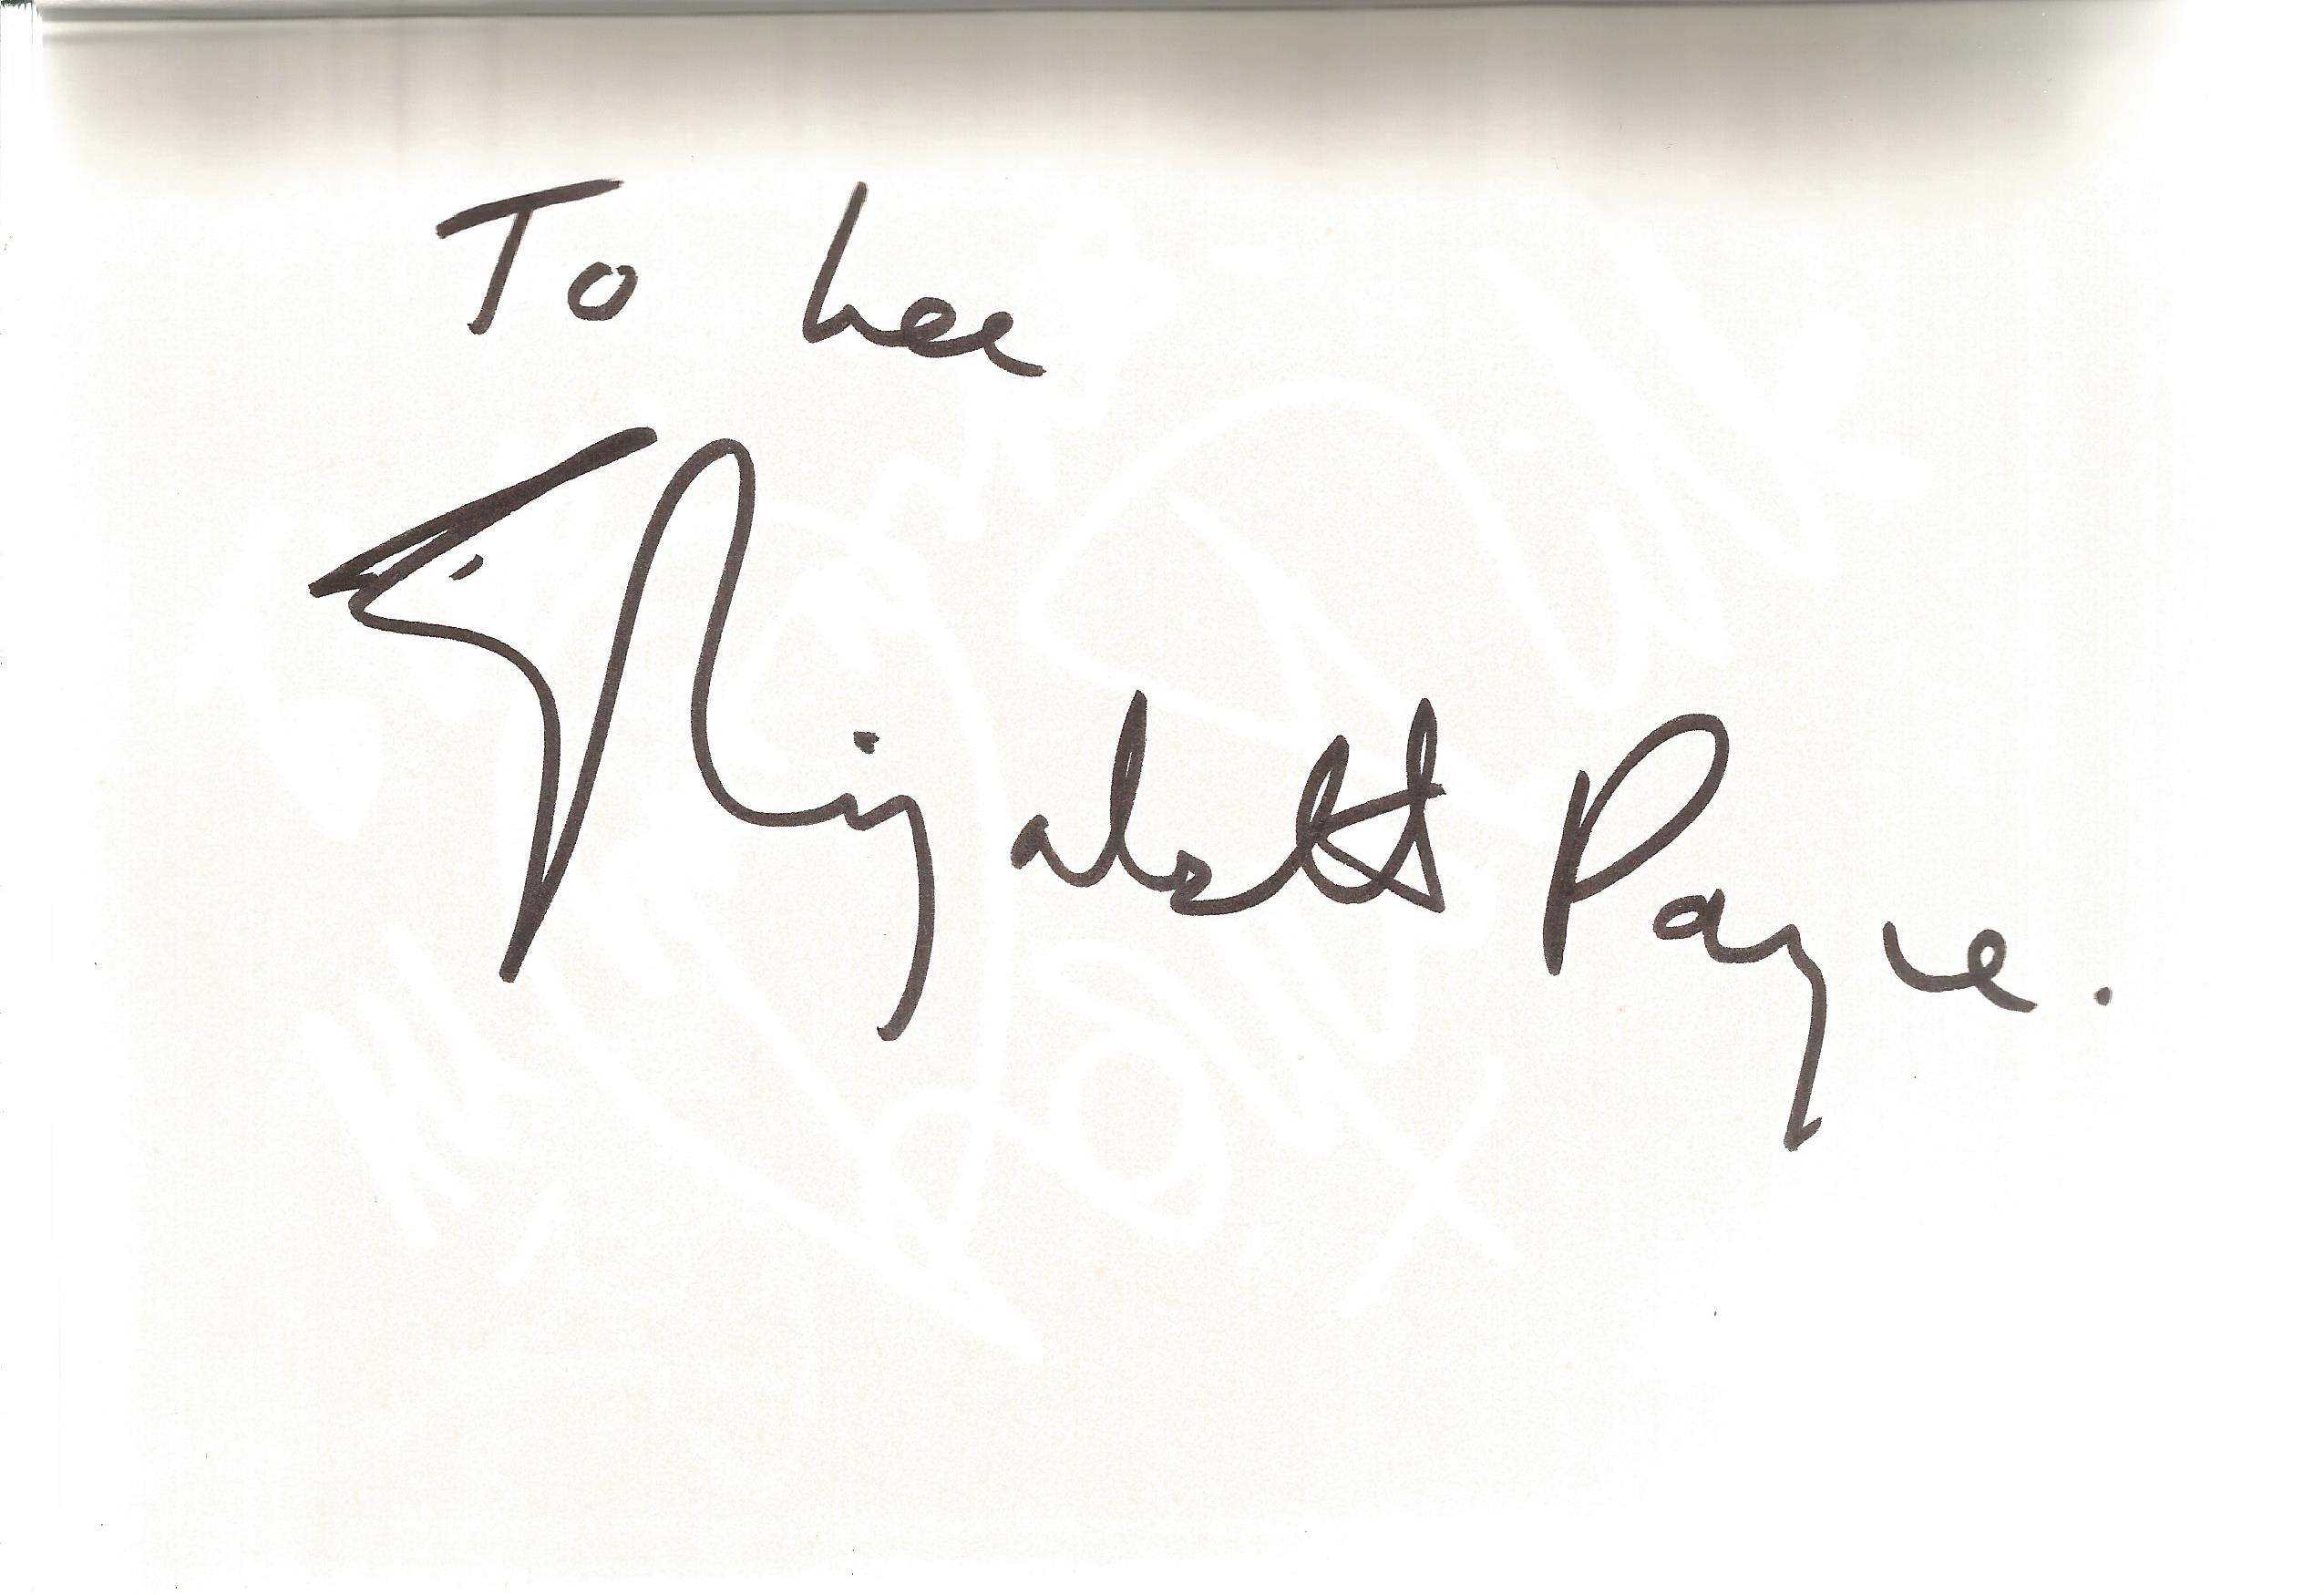 Autograph book with 50+ signatures on 8x6 pages. Some of signatures included are Tom Conti, Royce - Image 3 of 6